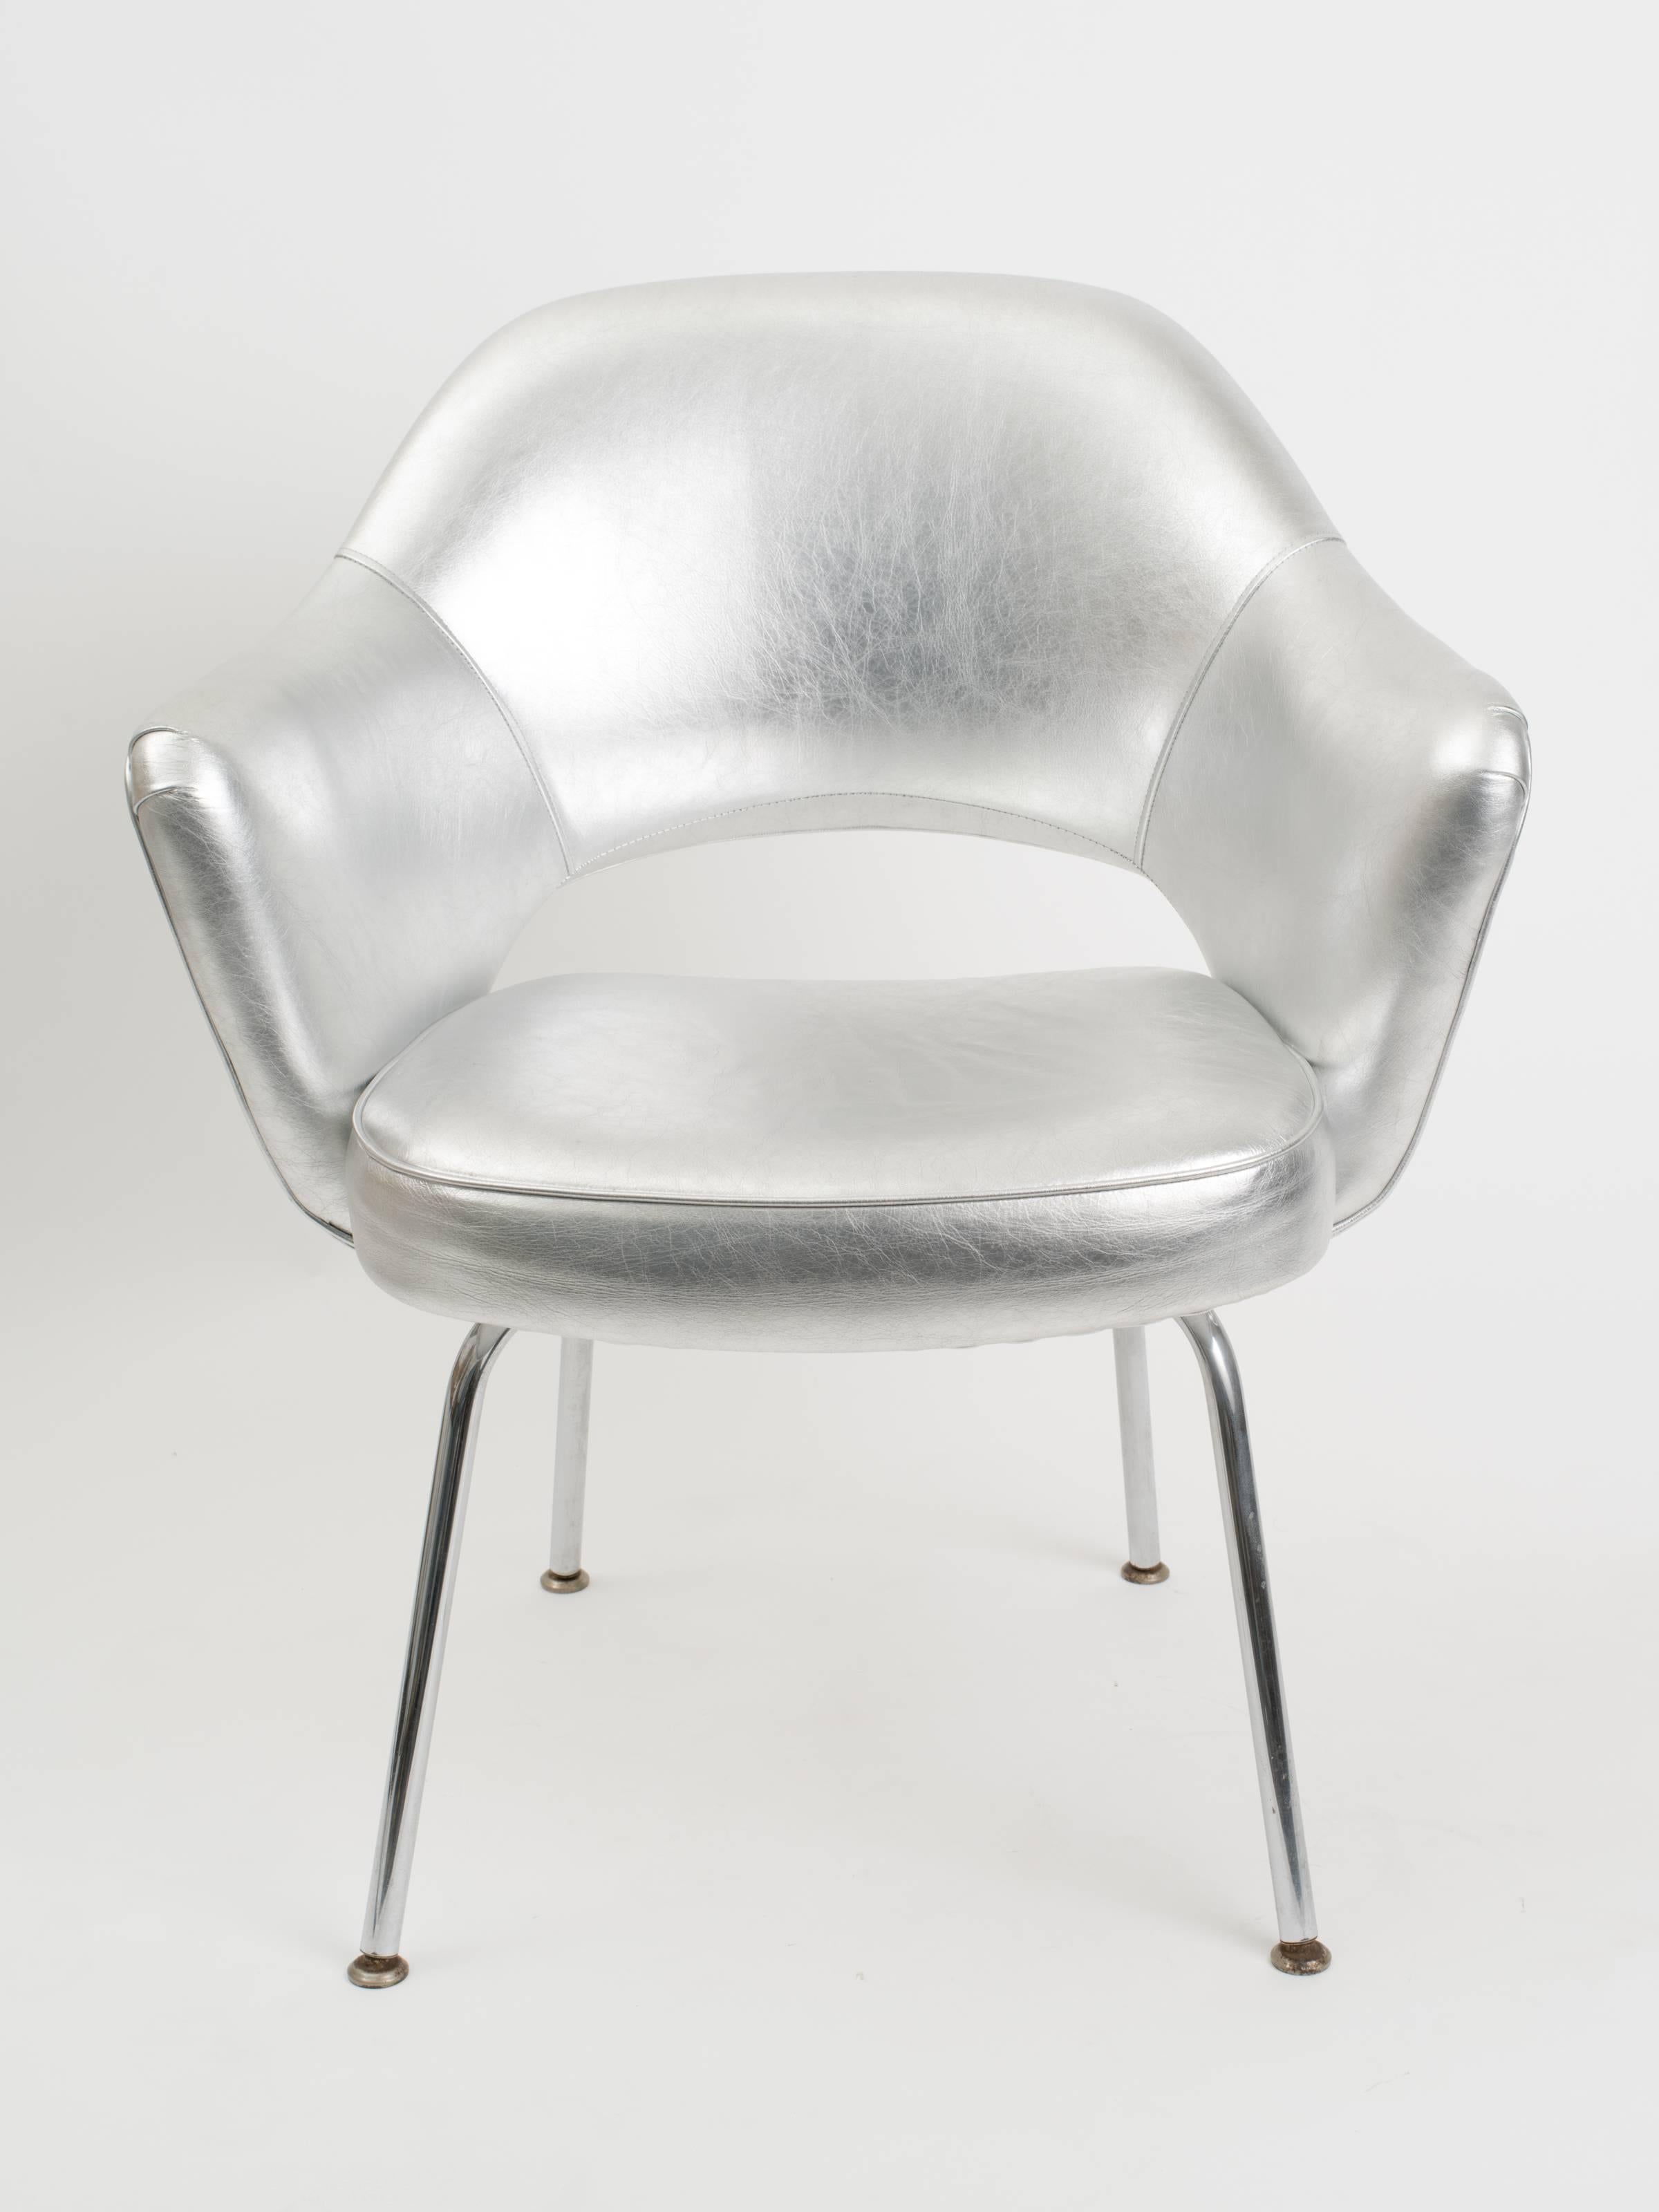 This chair has a new elegant silver leather upholstery and it is in excellent vintage condition.